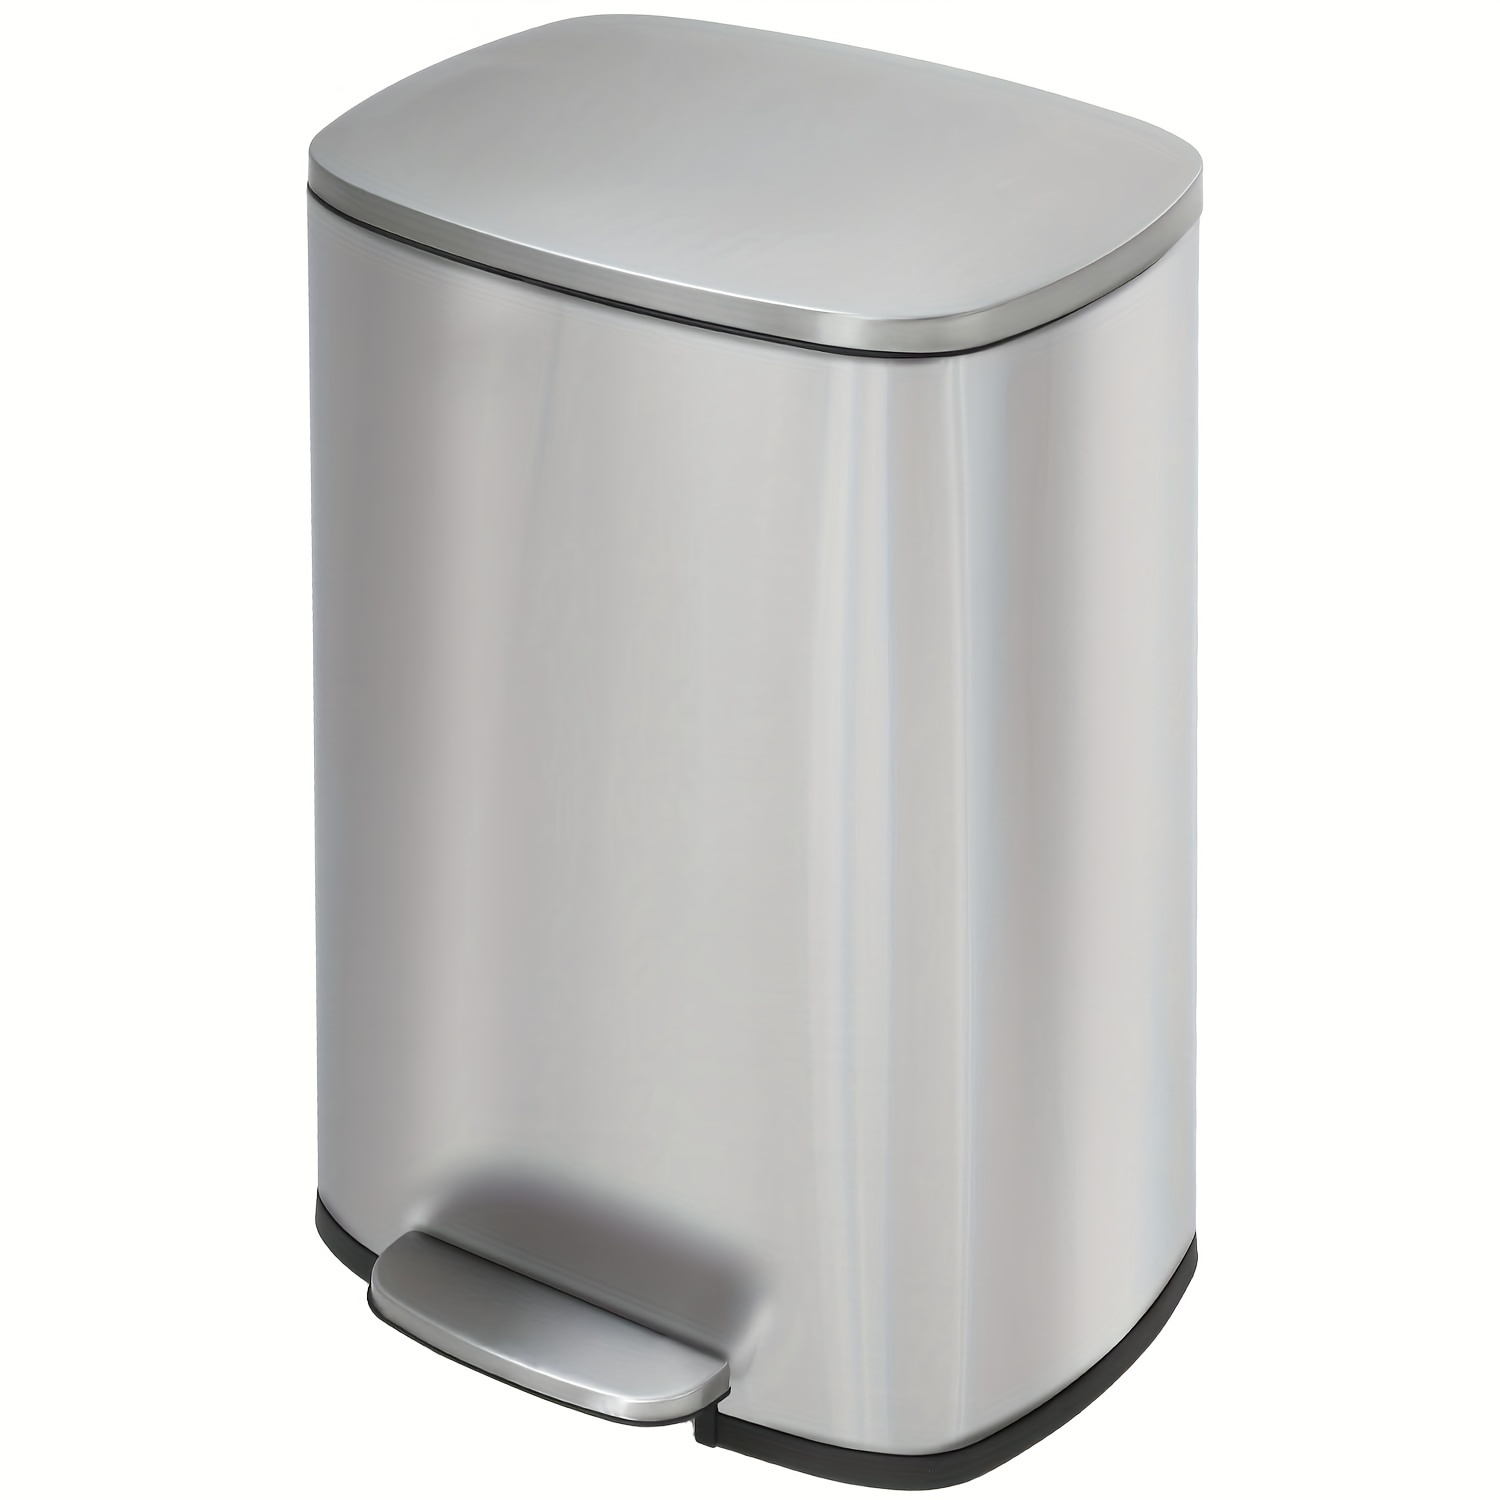 

13 Gallon/50 Liter Trash Can, Fingerprint Proof Stainless Steel Kitchen Garbage Can With Removable Inner Bucket And Hinged Lids, Pedal Rubbish Bin For Home Office